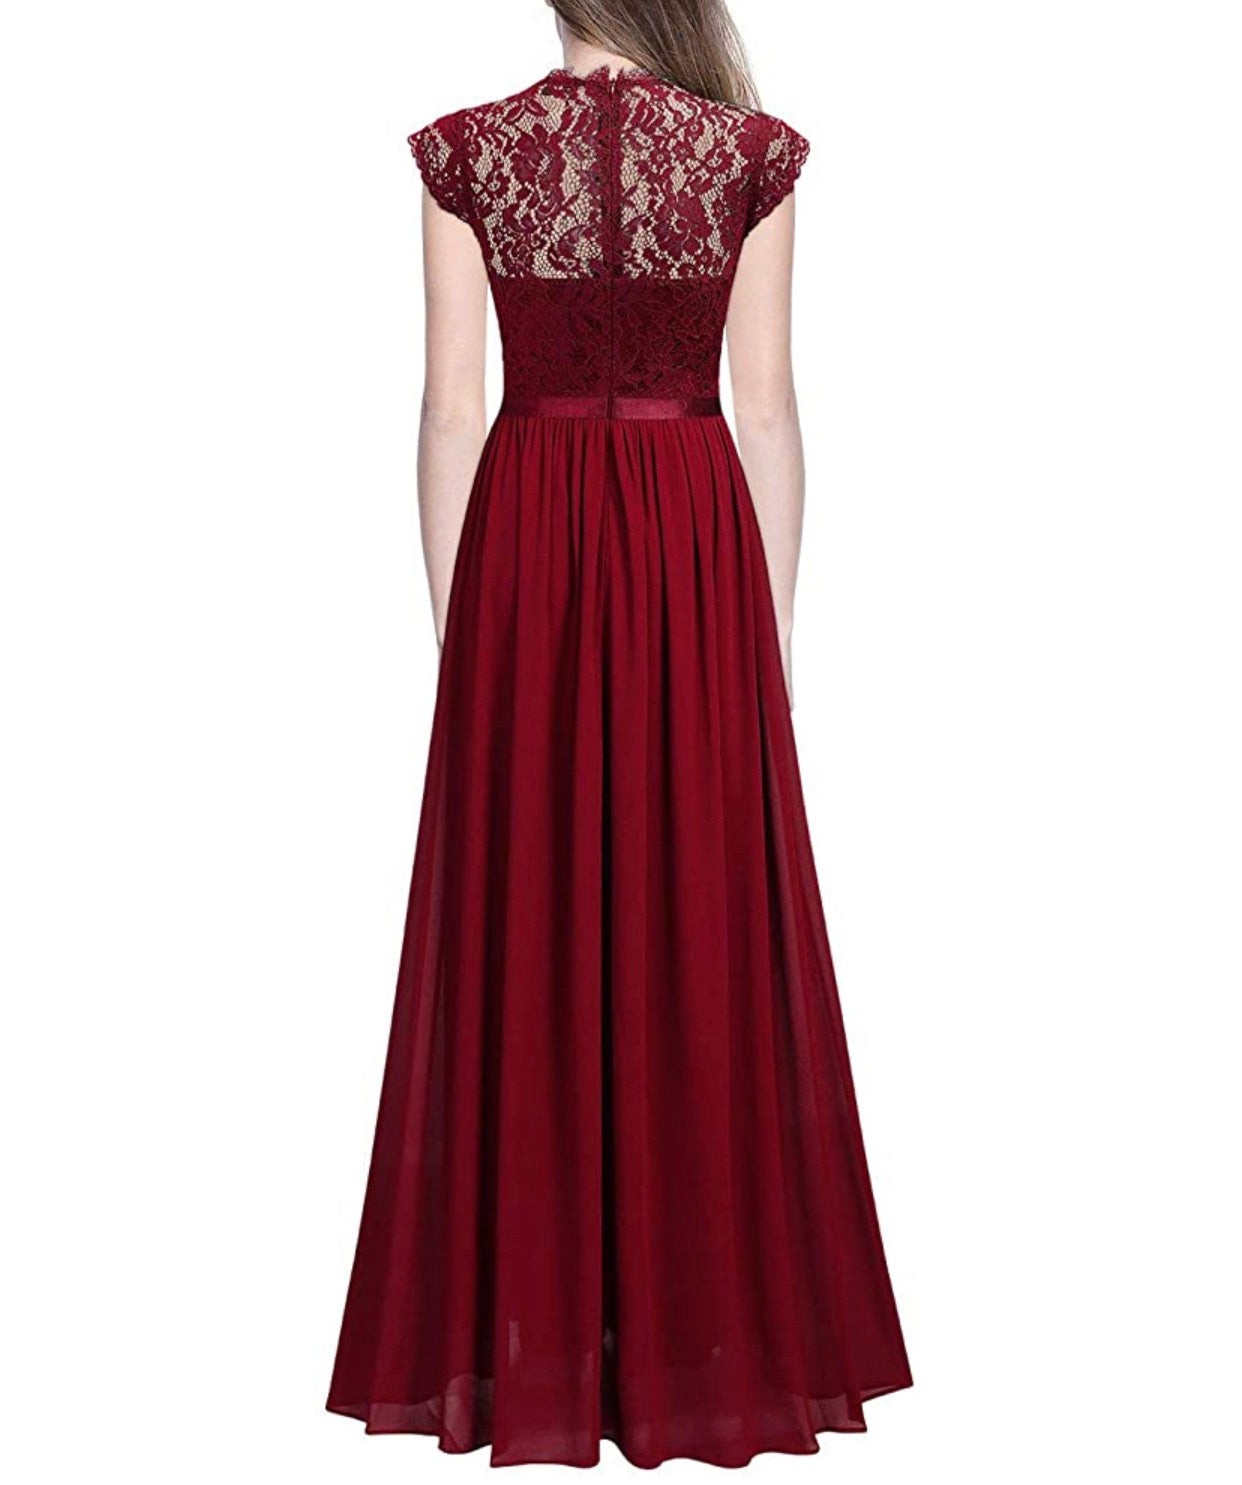 Floral Lace Long Length Dress, Sizes Small - 2XLarge (Red Dress)